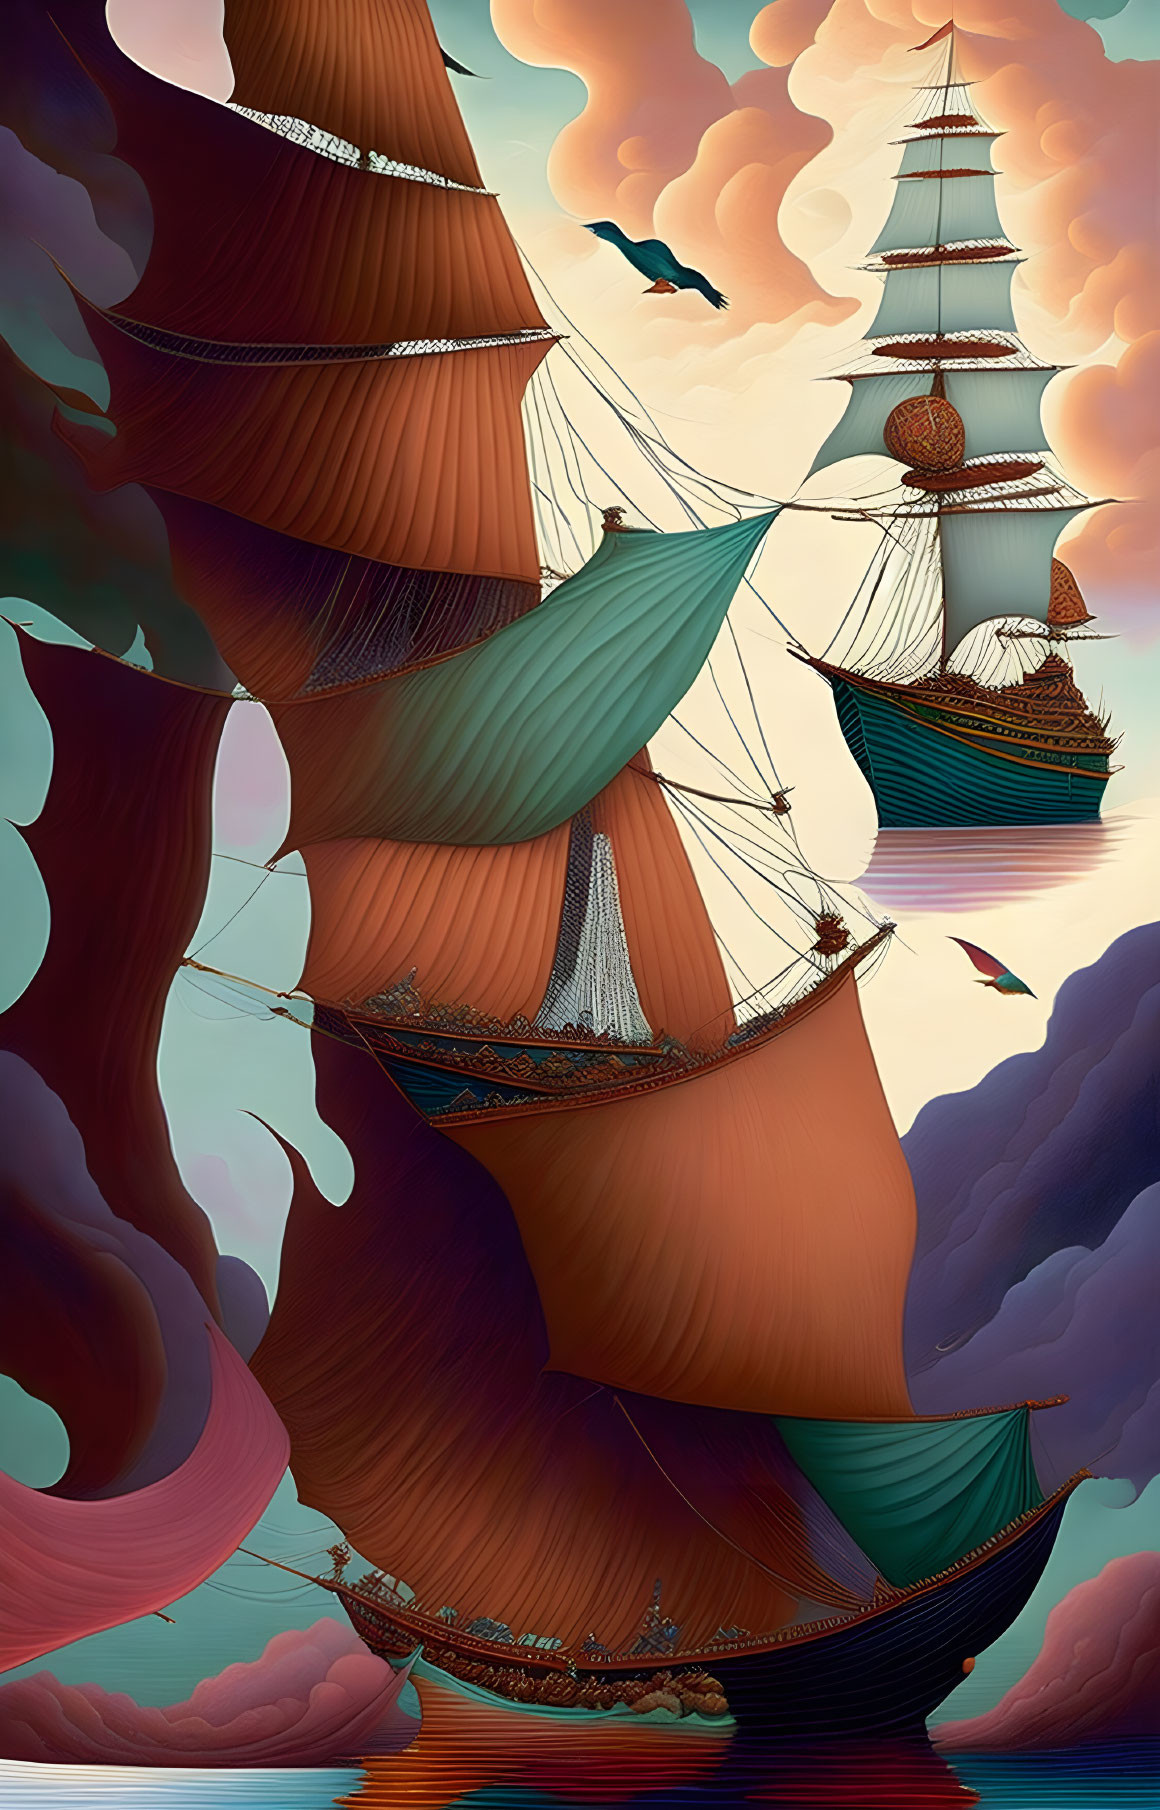 Surreal ship and tree-like structures in pastel skies